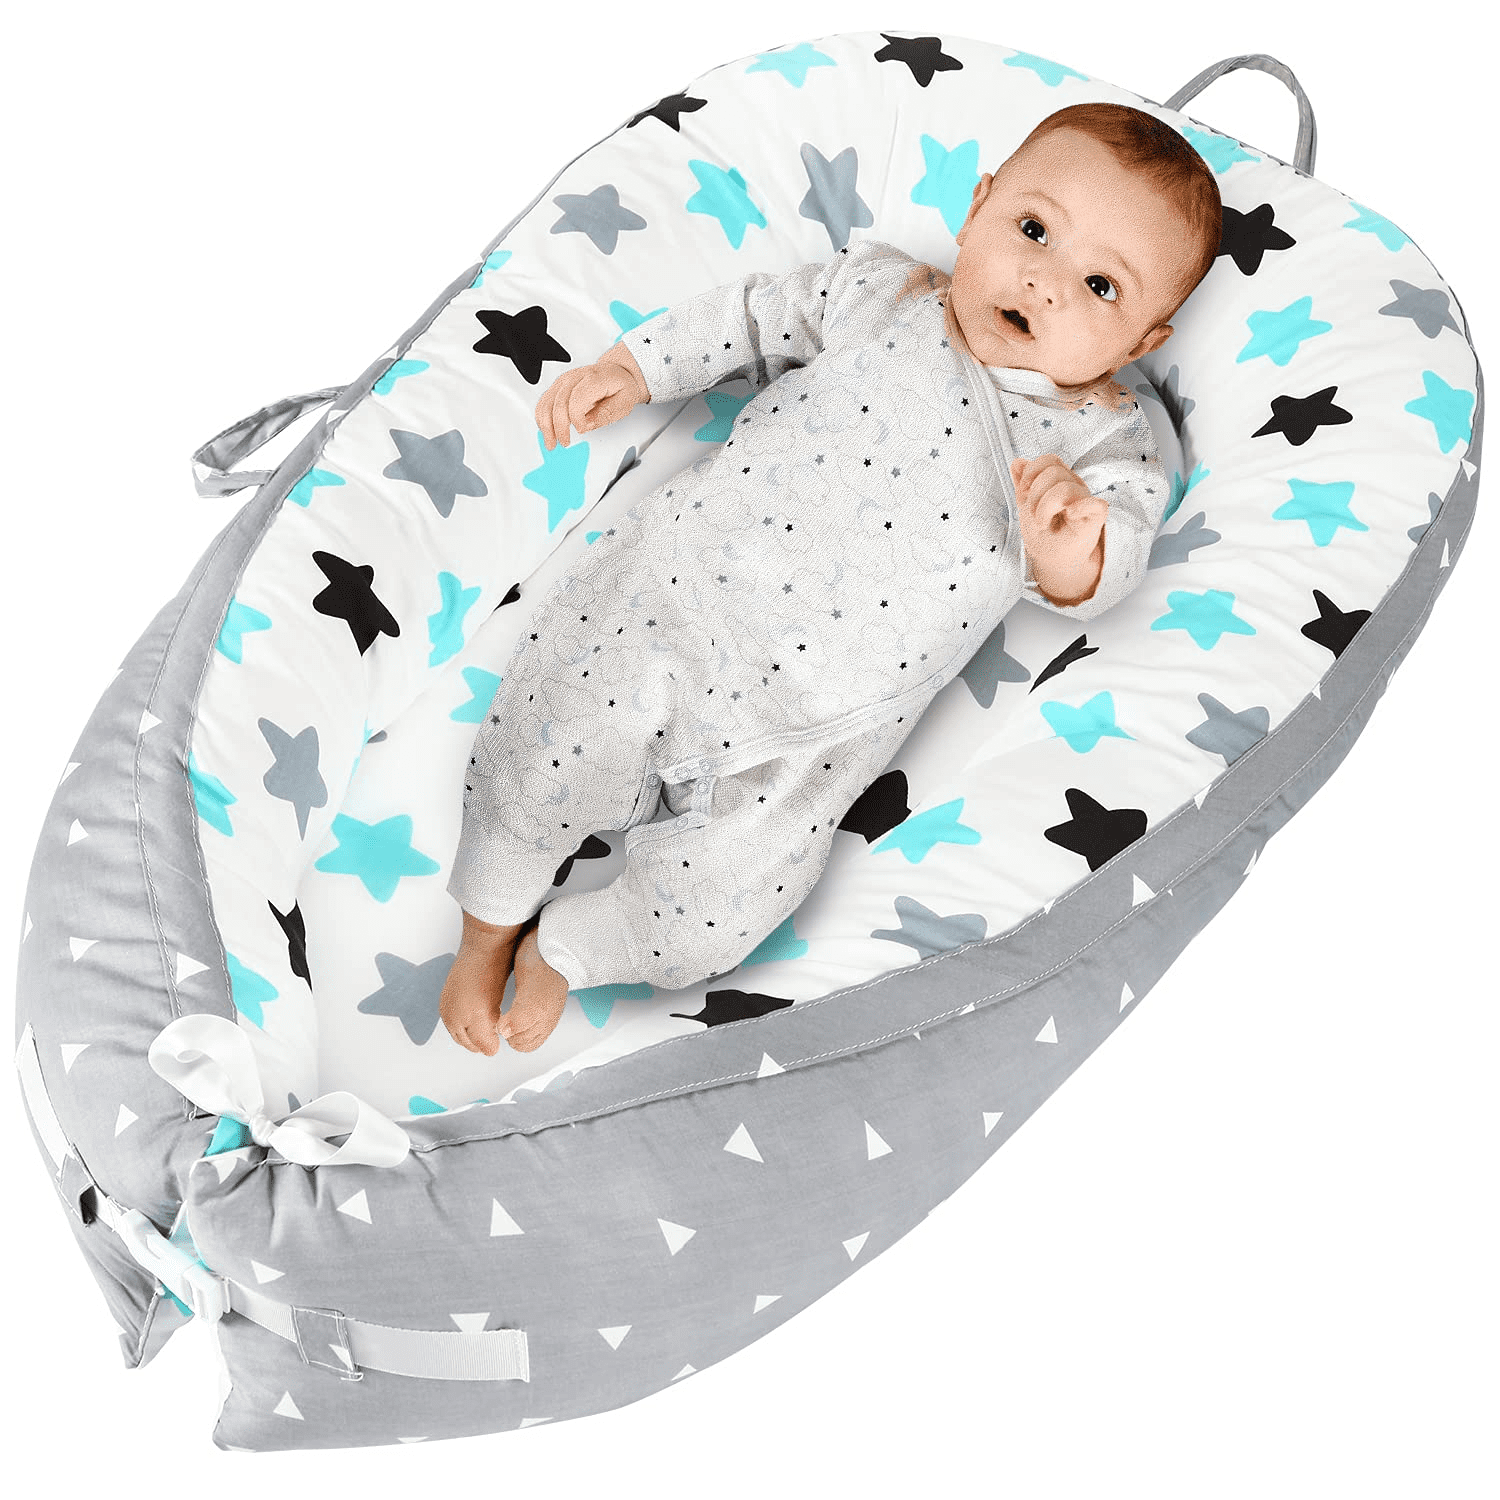 Rainbow Baby Lounger Nest Co Sleeper Soft and Breathable Baby Nest Bed Adjustable Cotton Portable Baby Lounger Suitable for 0-18 Months 